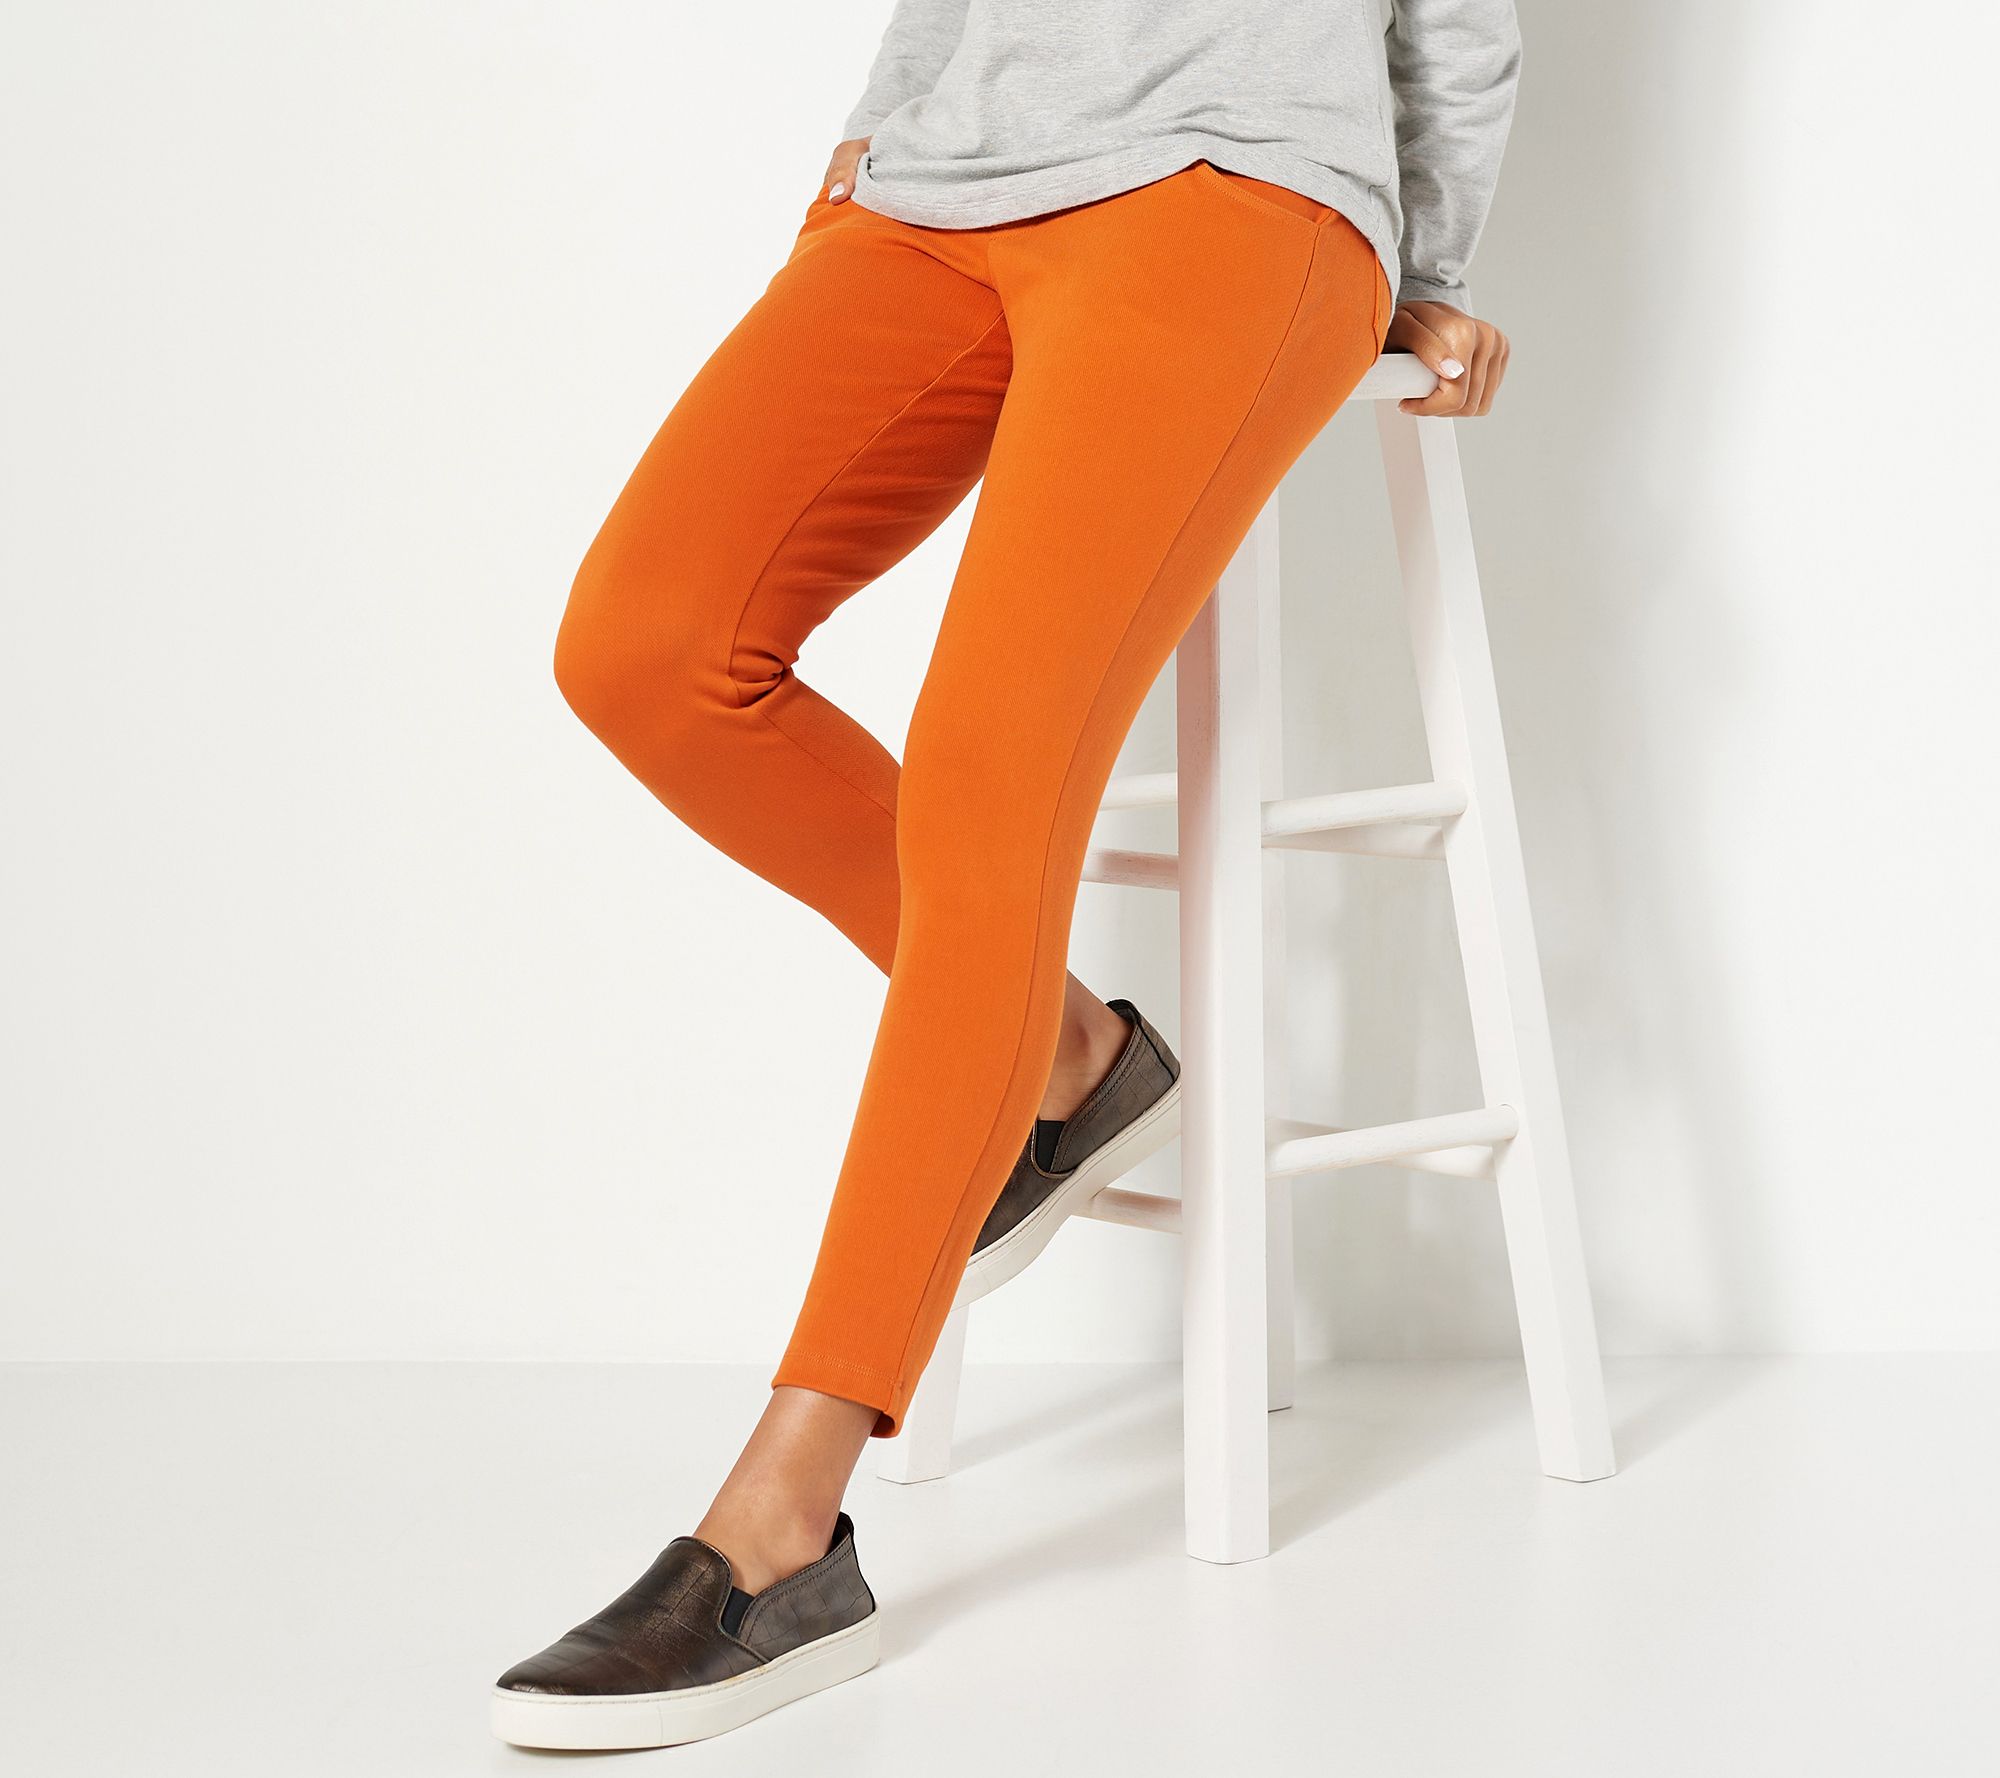 As Is Women with Control Tall Prime Stretch Denim Leggings Pocket